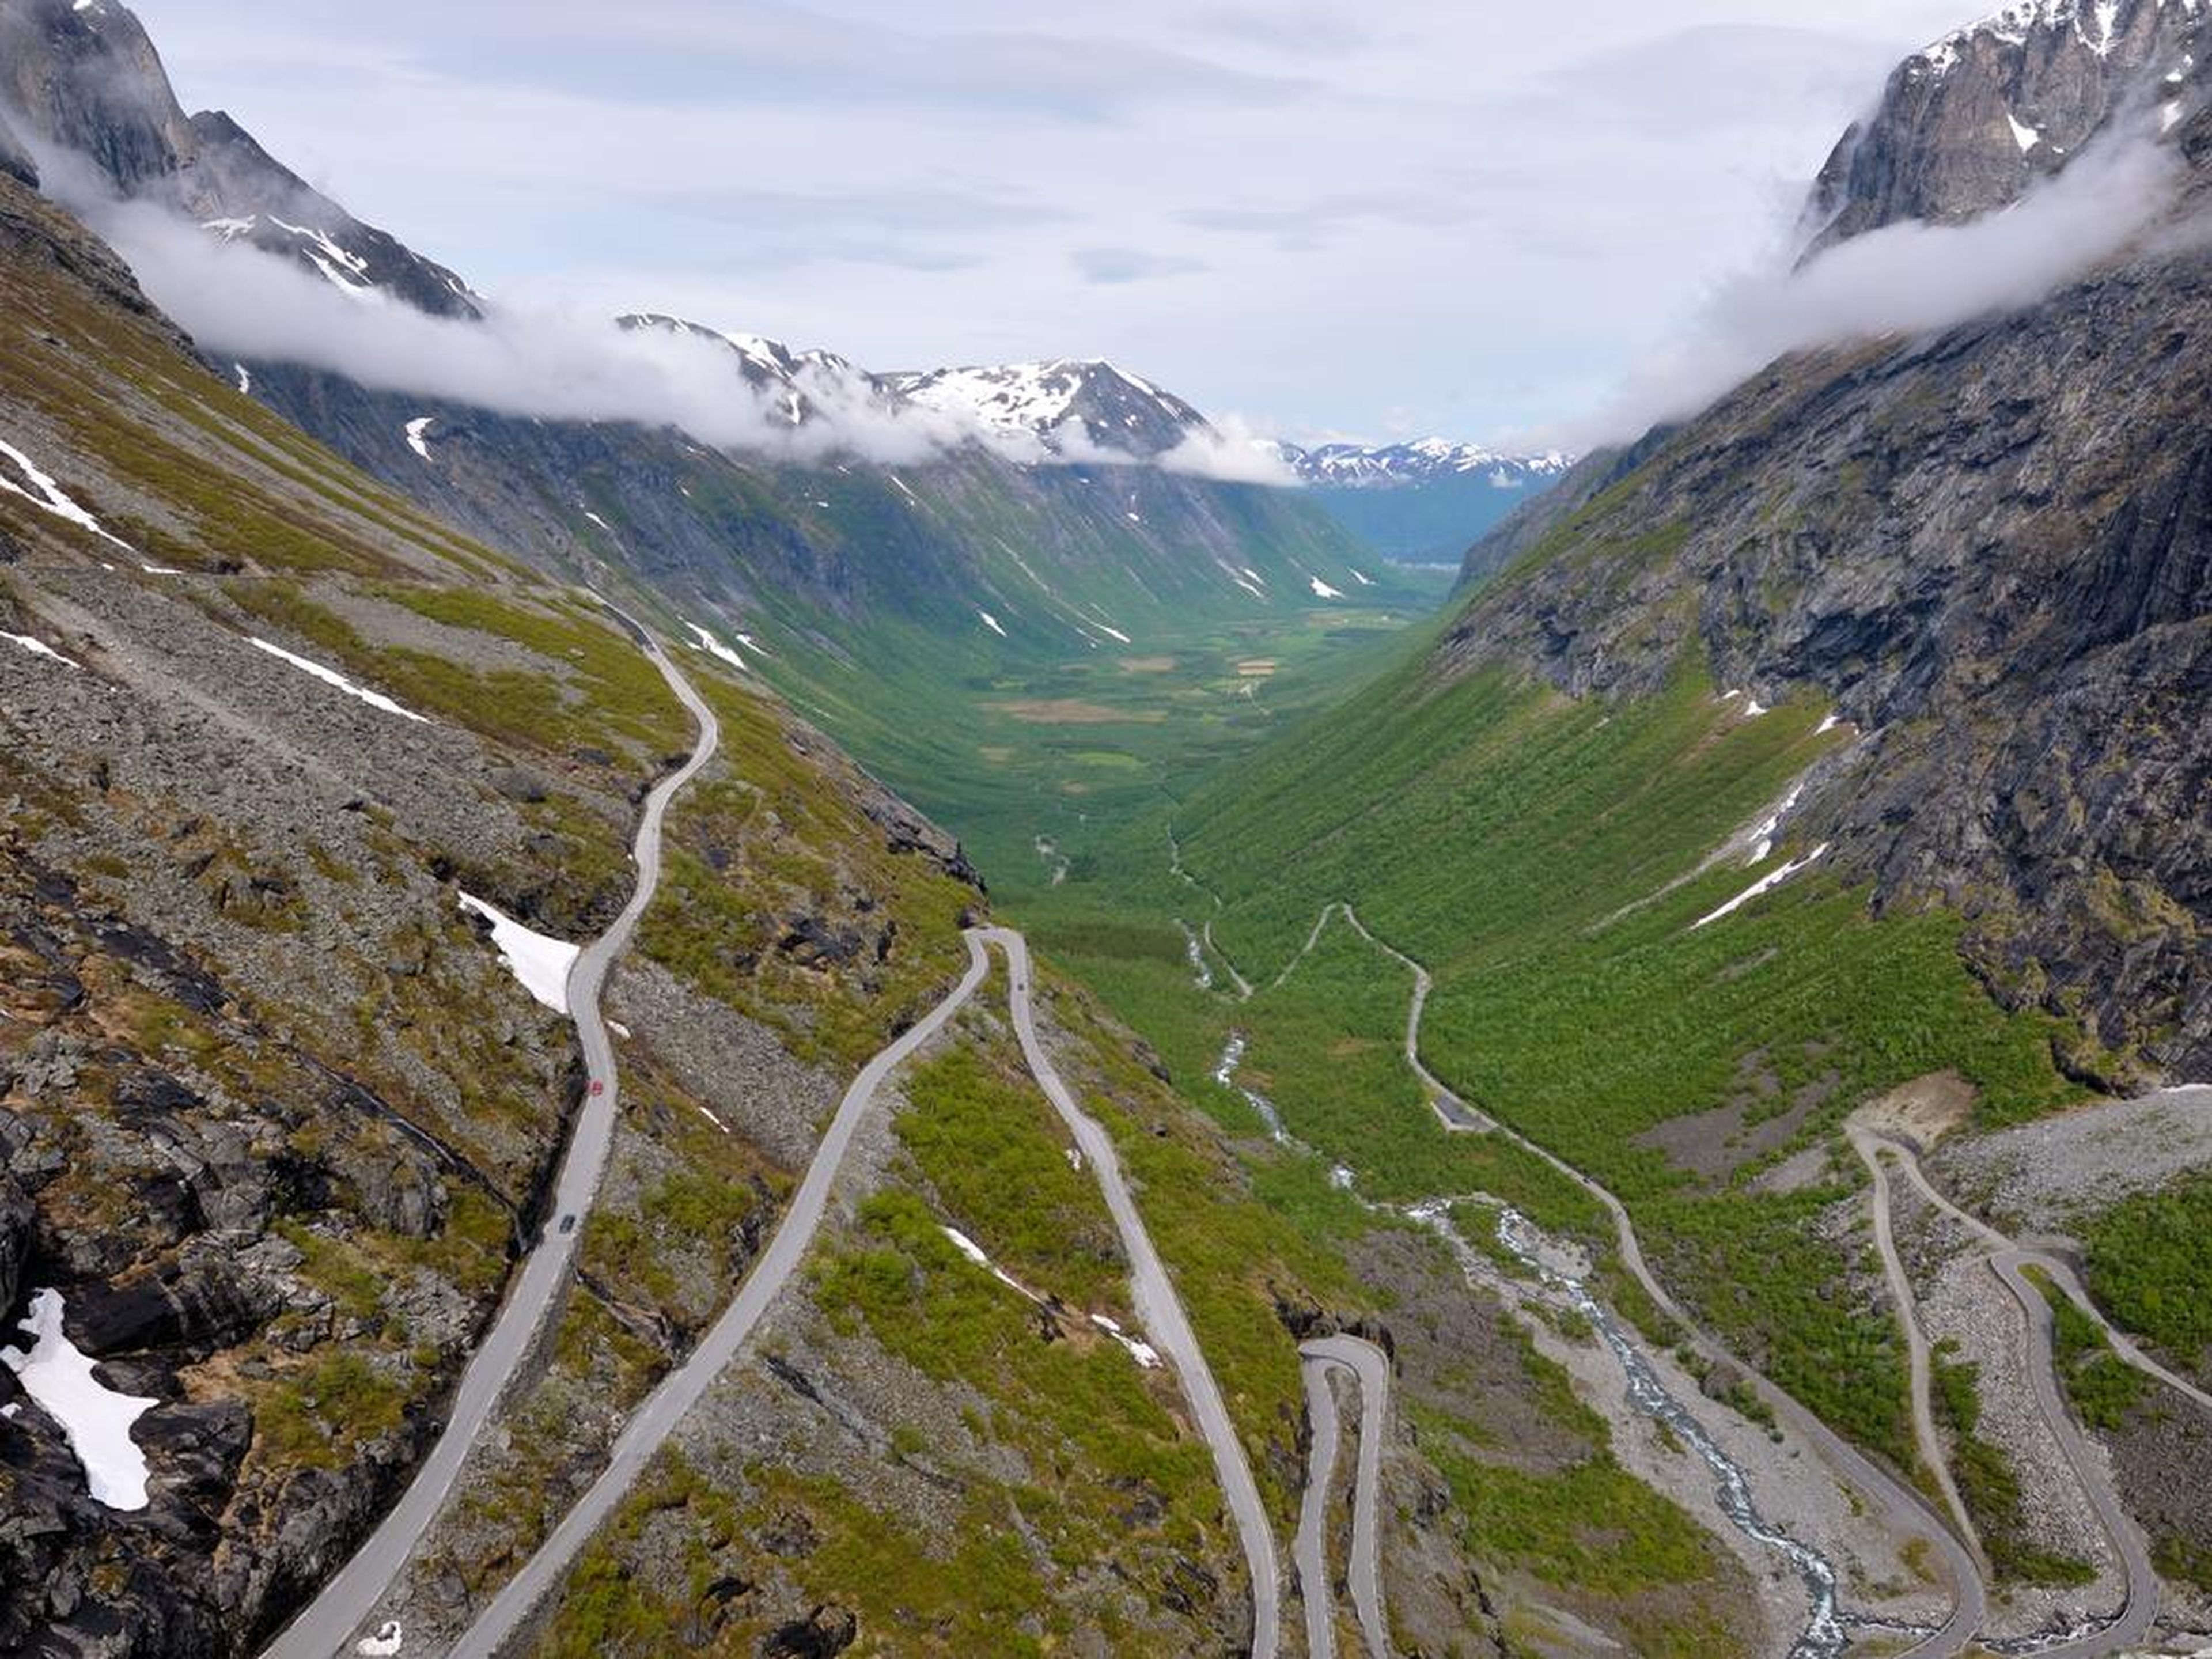 A tourist fell to his death in Norway's popular photo-taking destination, the mountain pass of Trollstigen.